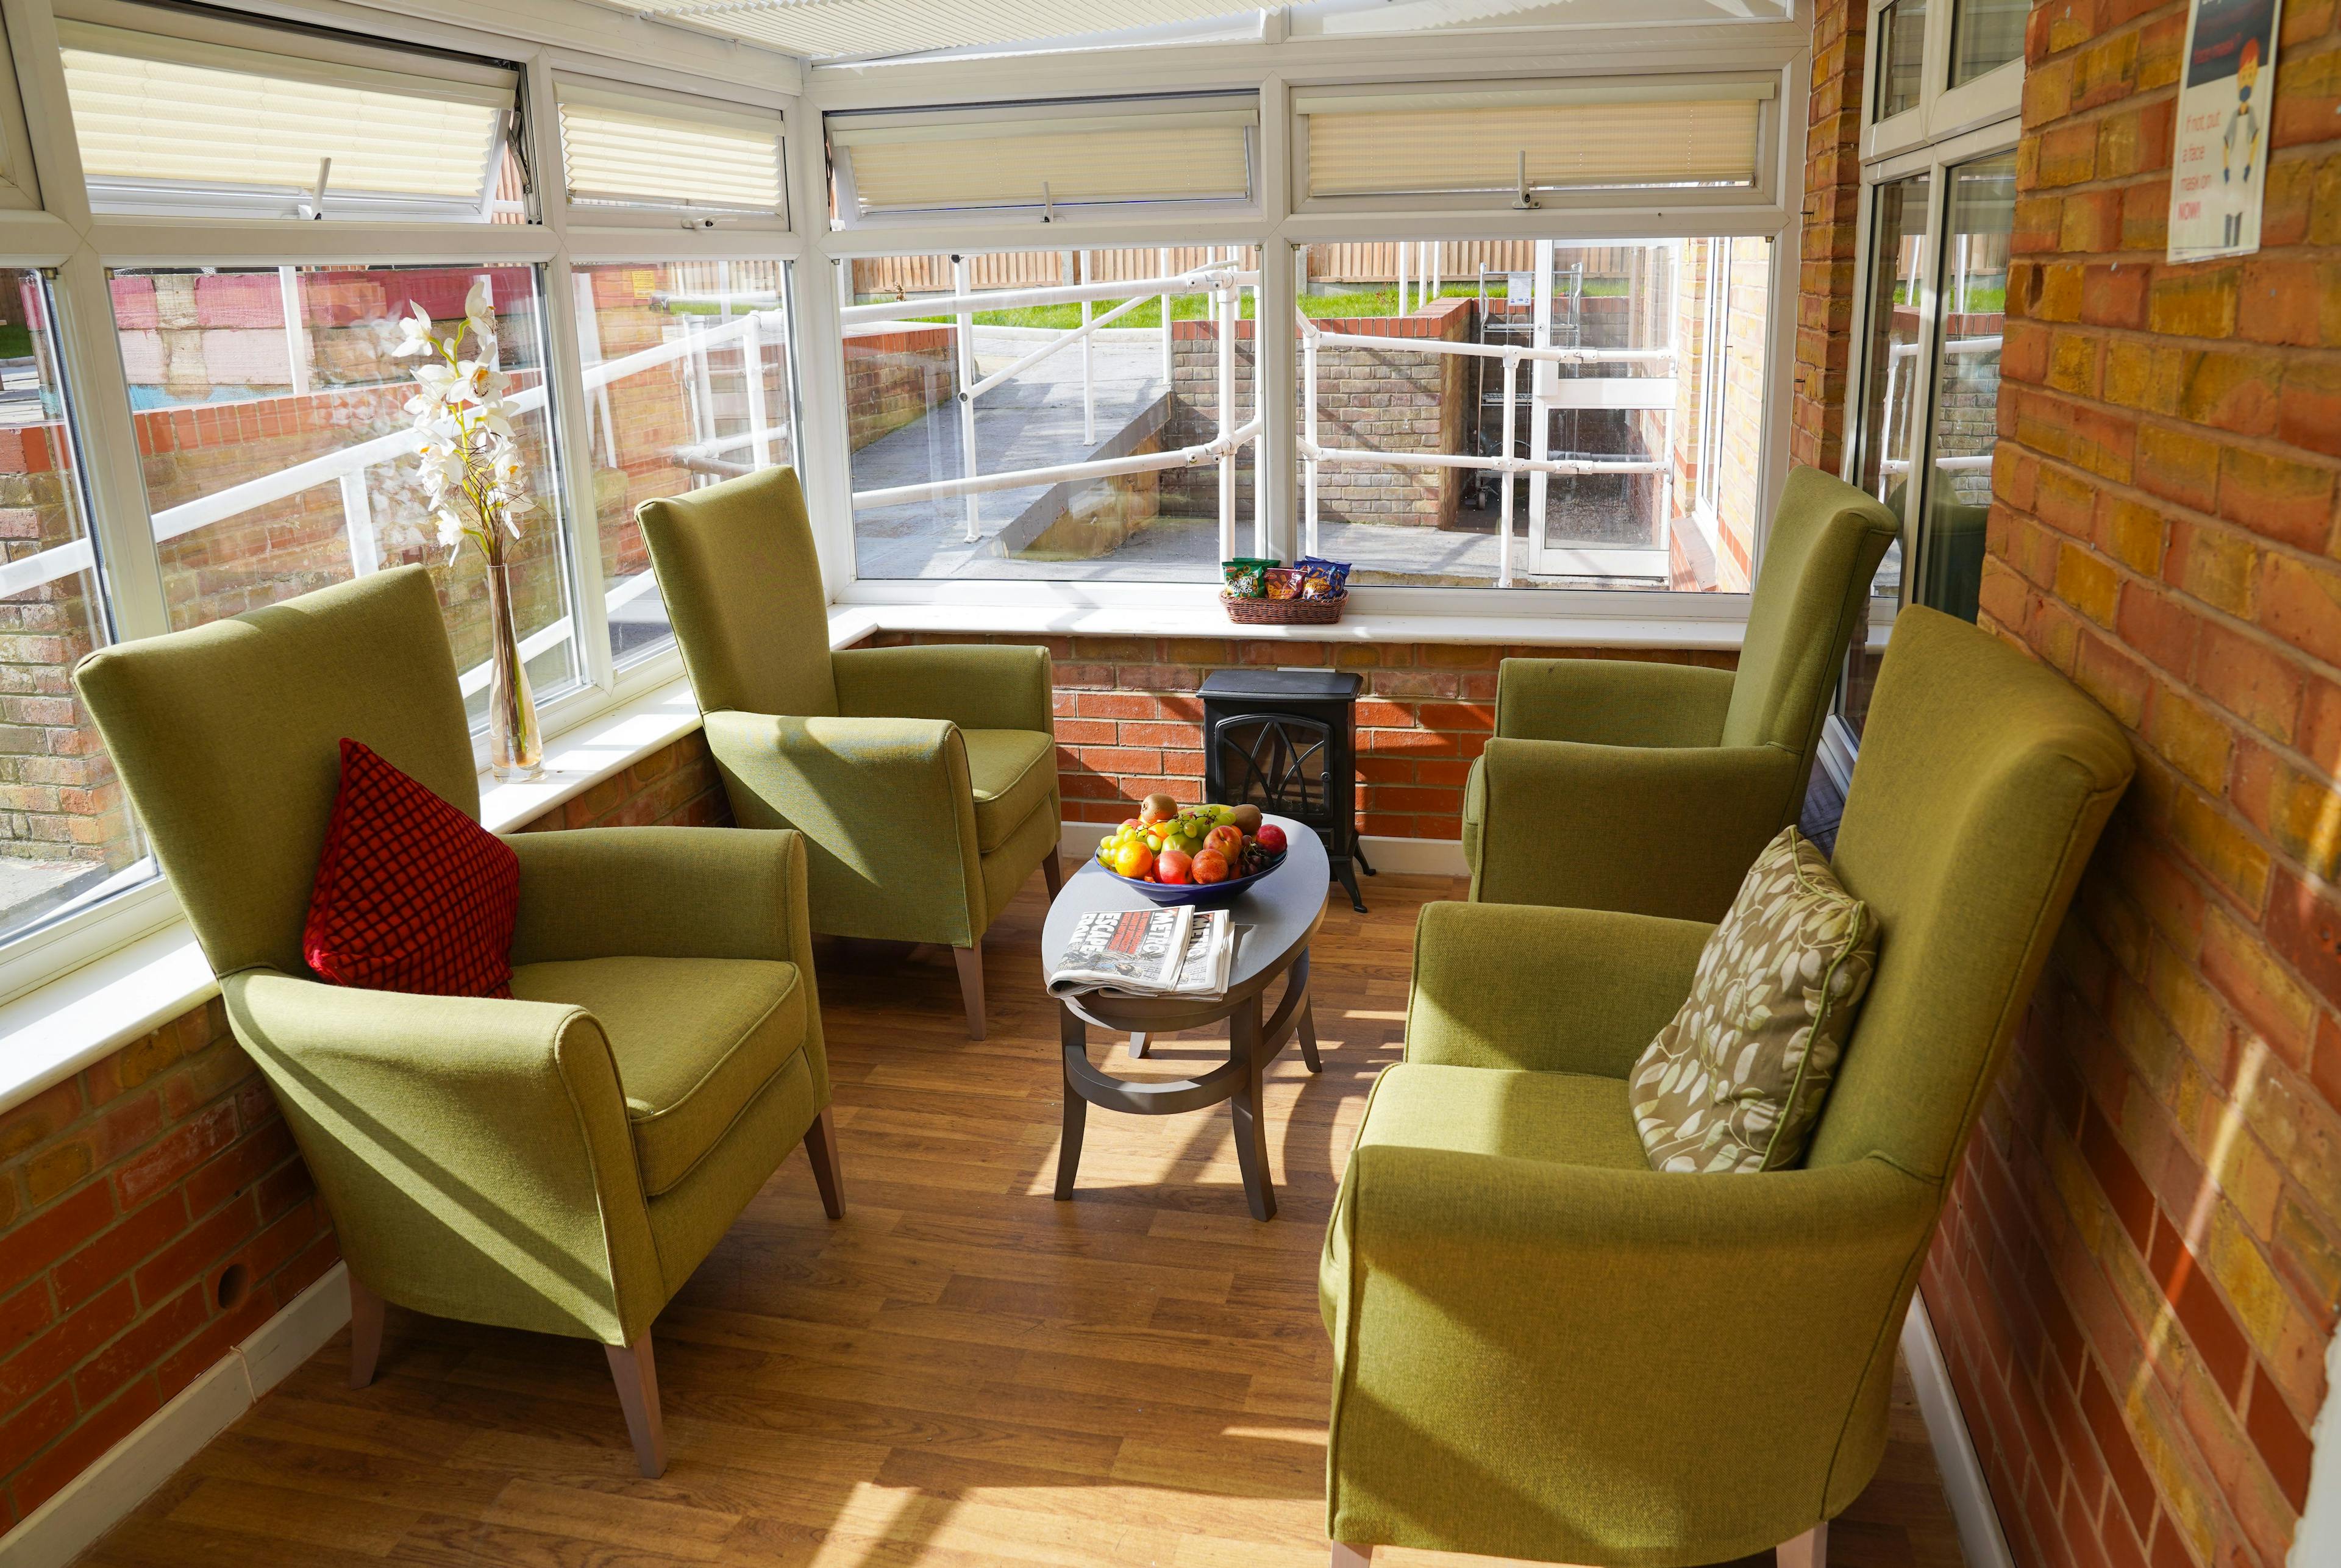 Conservatory at The Manse Residential Care Home, South Norwood, London